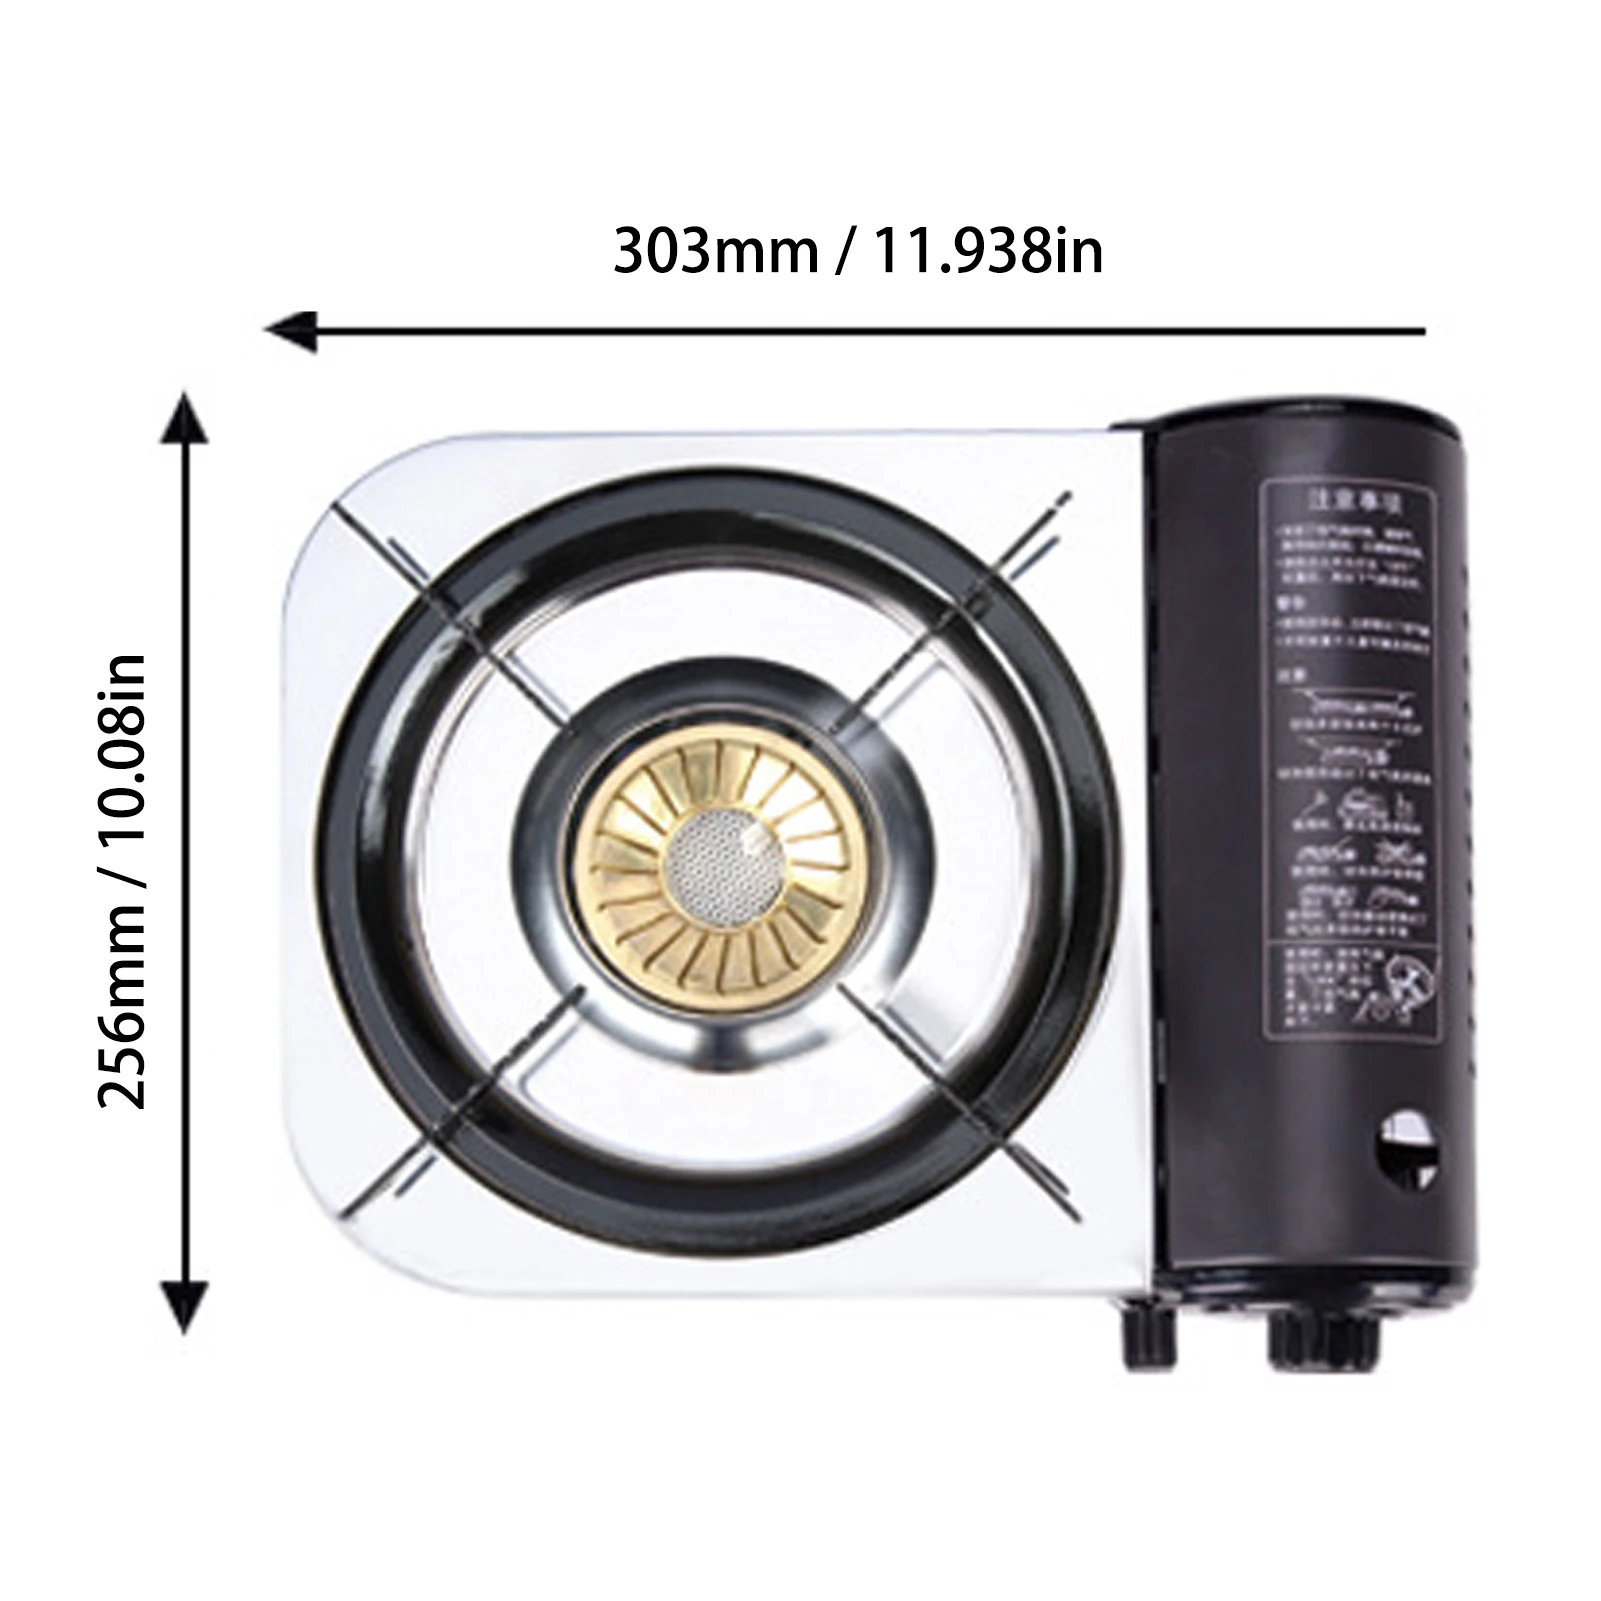 

Outdoor Portable Burner Butane Gas Stove Gas Cooker Piezoelectric Ignition Portable Barbecue Stove Safe Camping Gas Stove